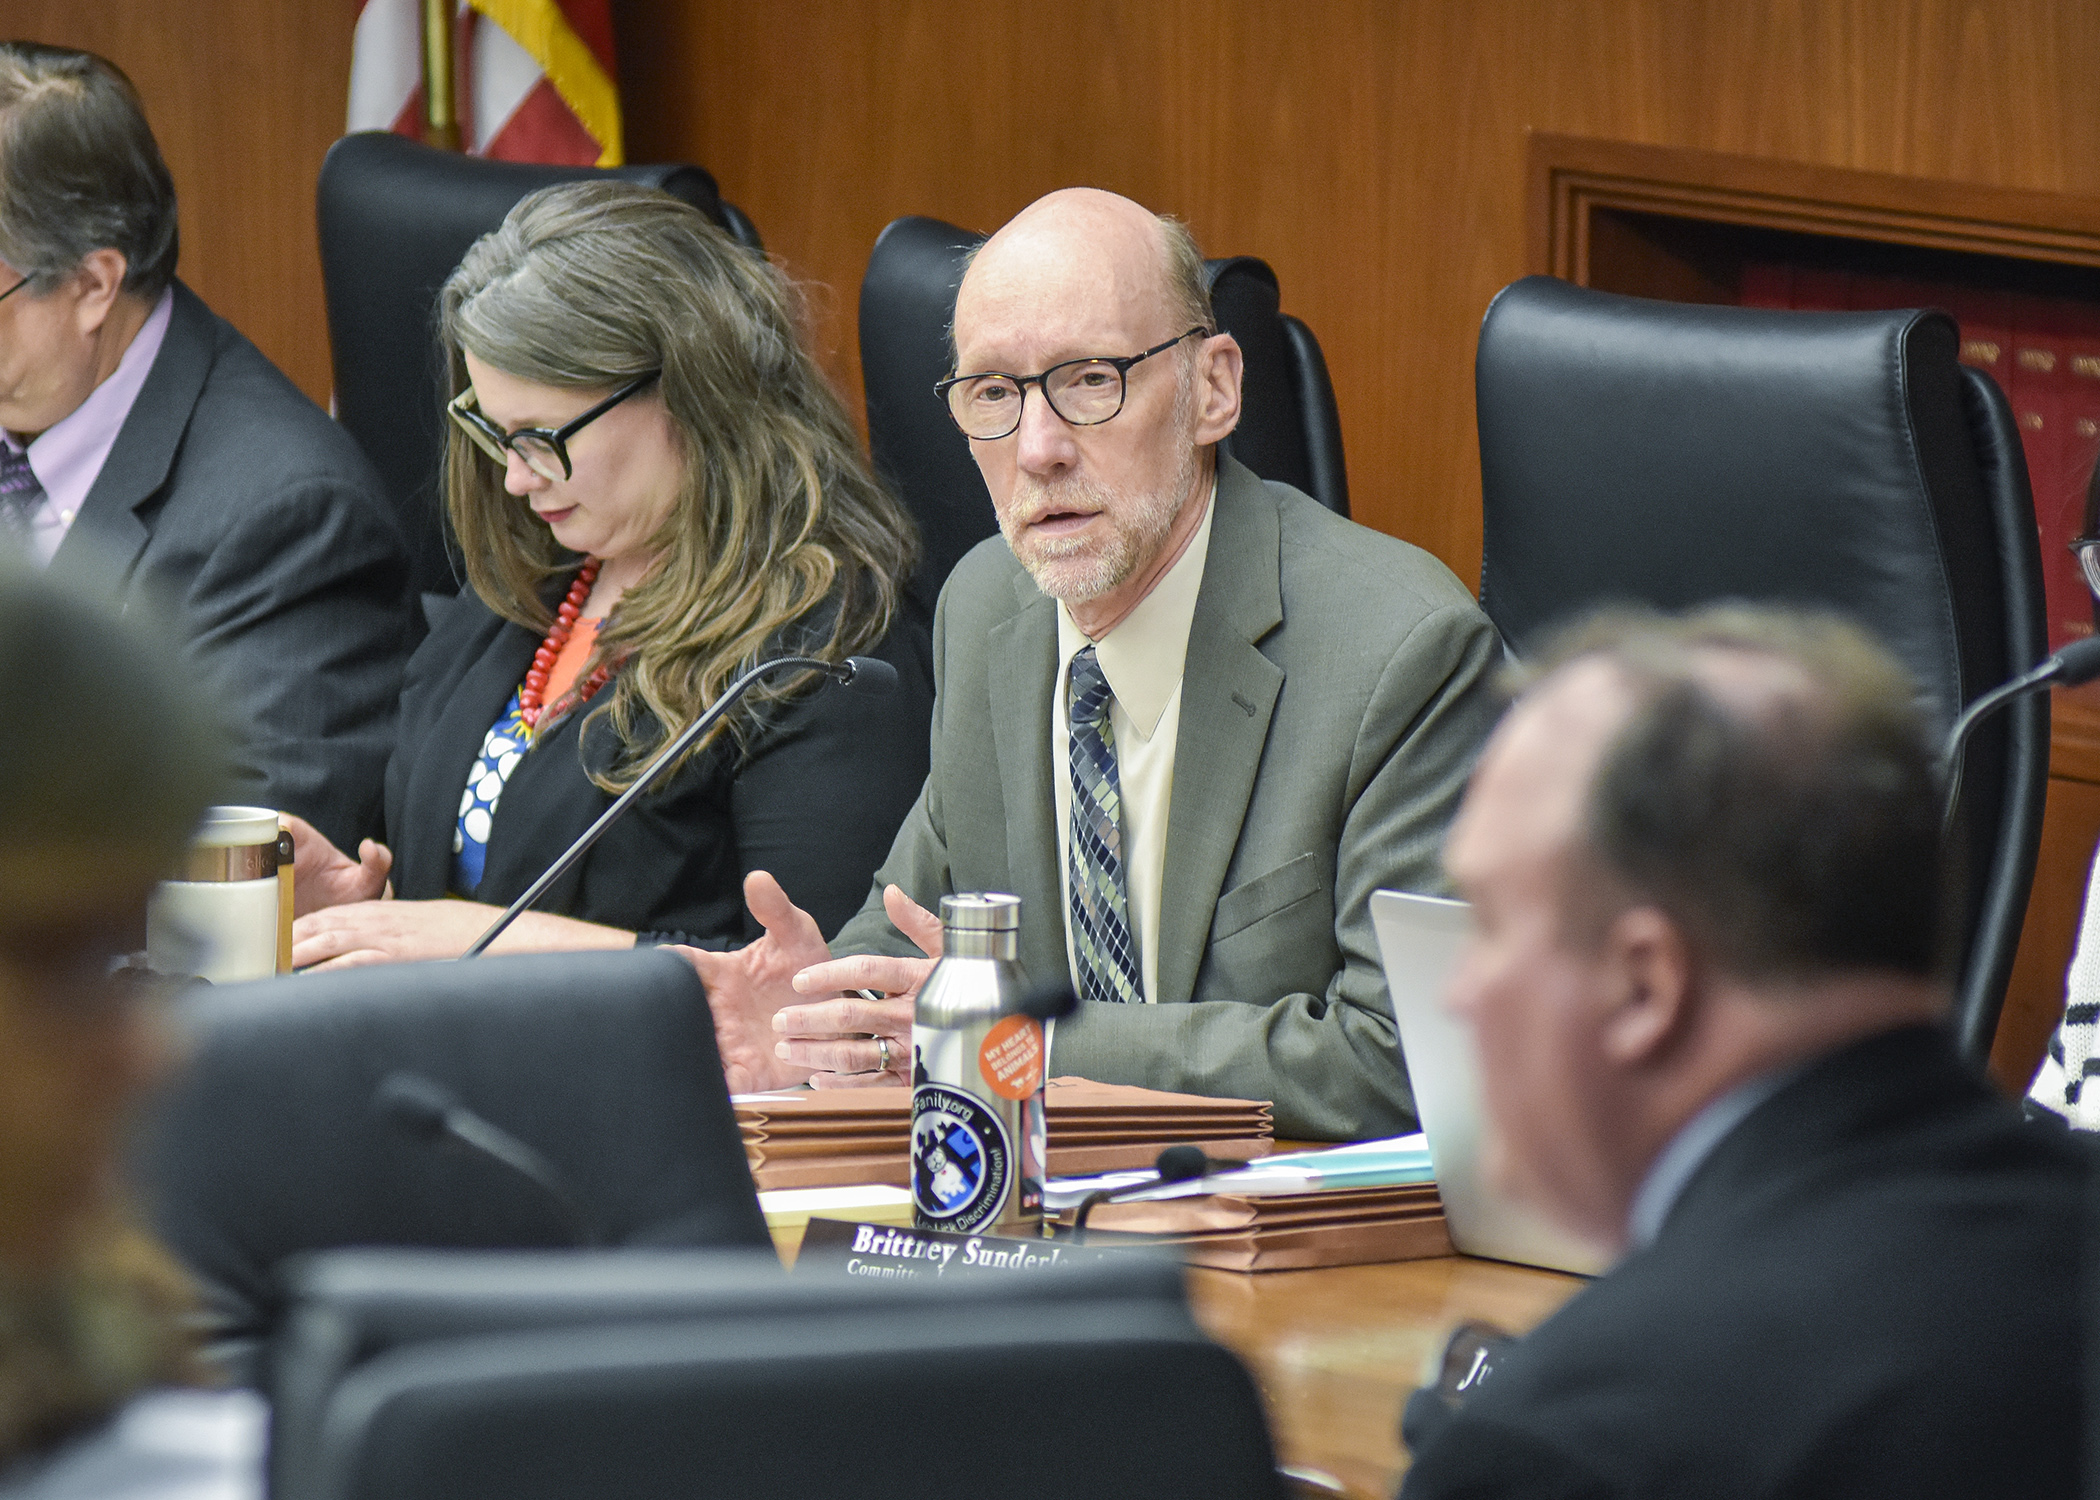 Rep. Jim Davnie, chair of the House Education Finance Division, comments during a May 22 informational hearing on the omnibus education bill that will be taken up during the special session. Photo by Andrew VonBank